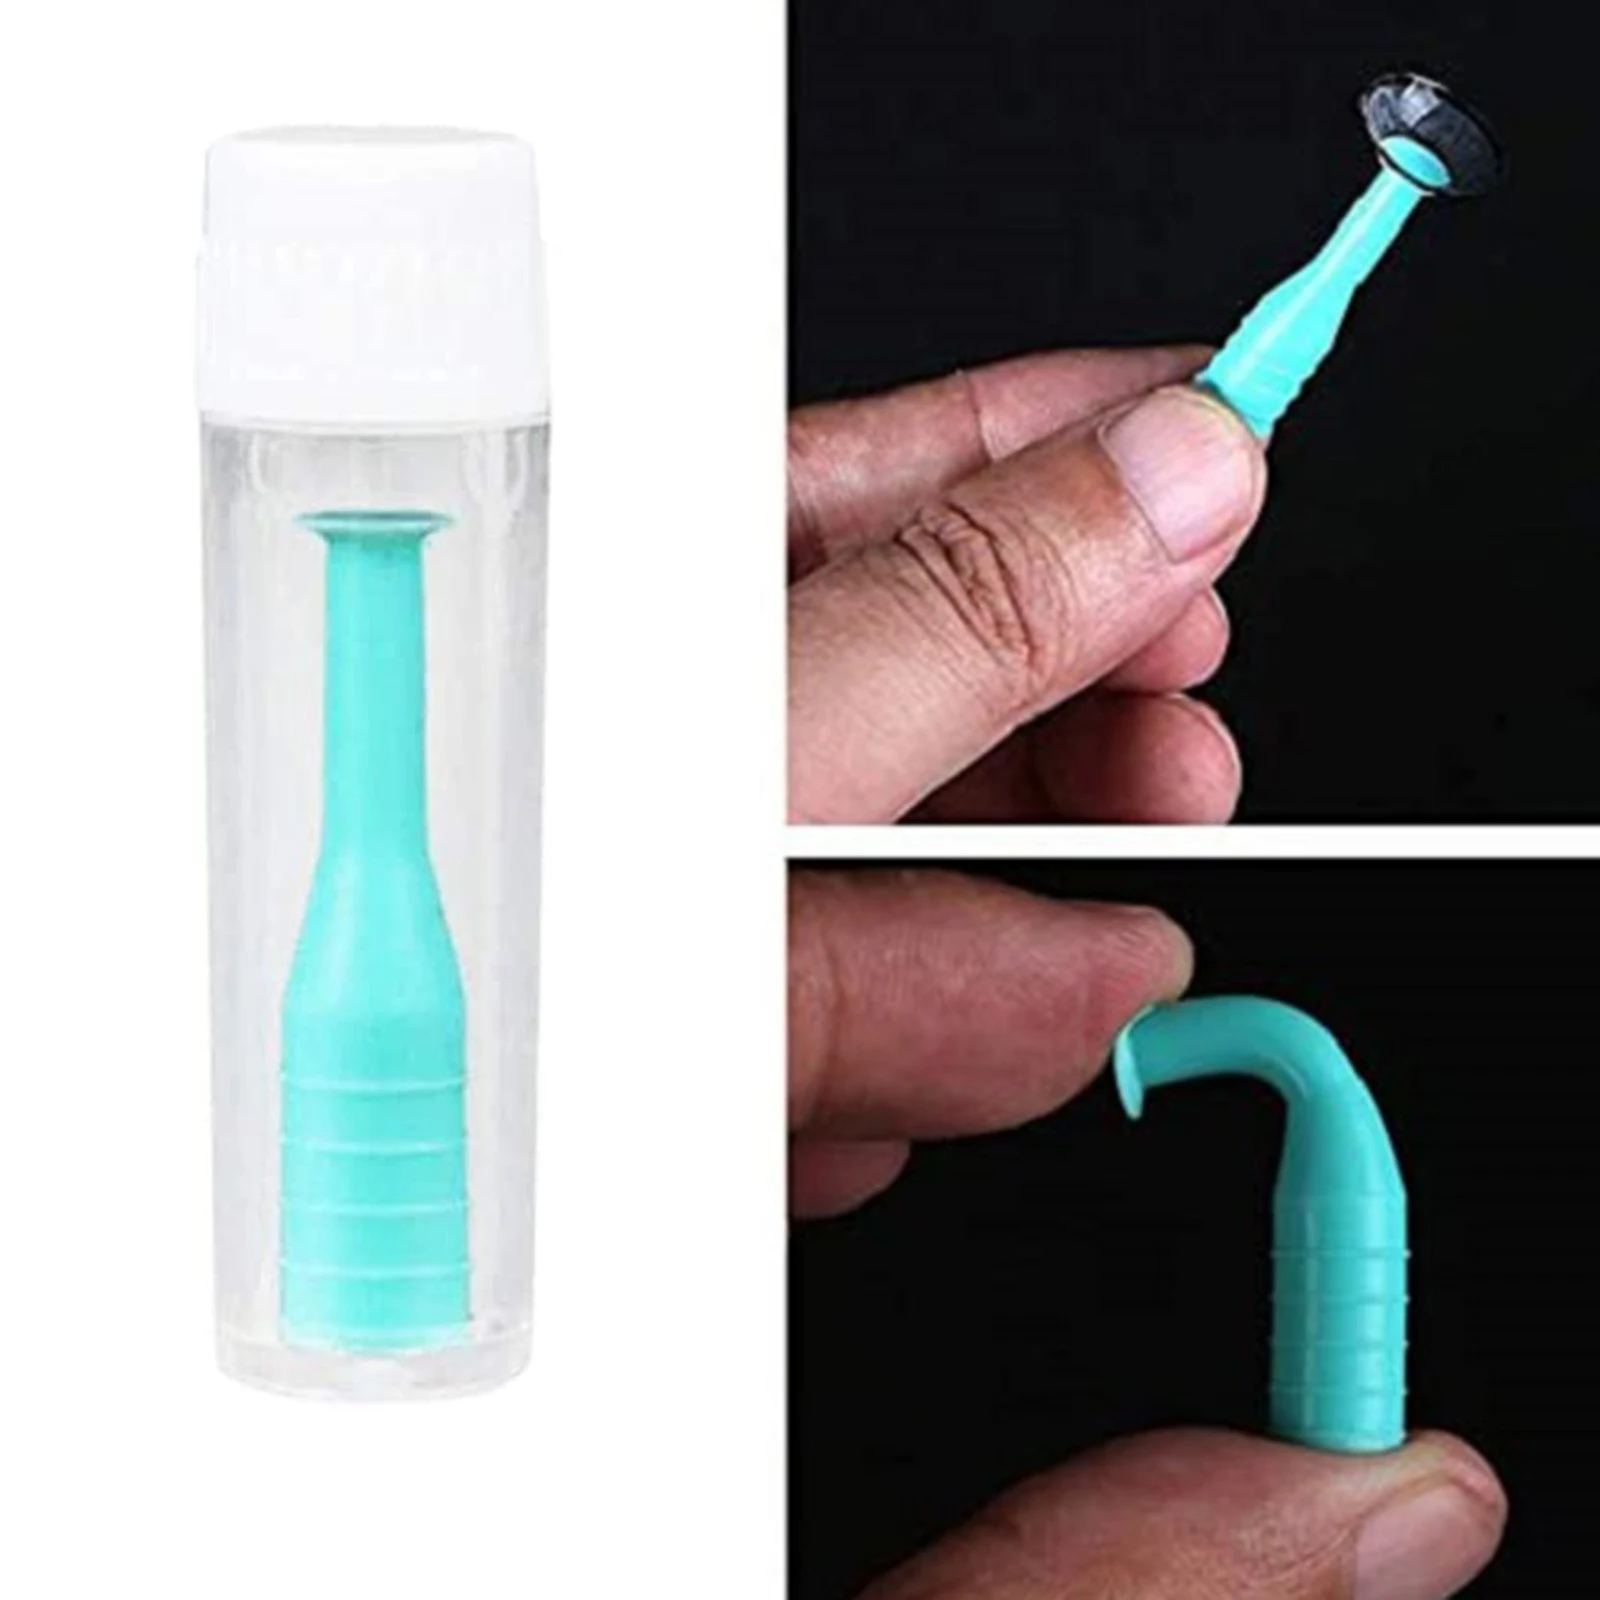 Hard Contact Lens Remover Insertion Tool Plunger Extractor Device for Soft Hard Lenses